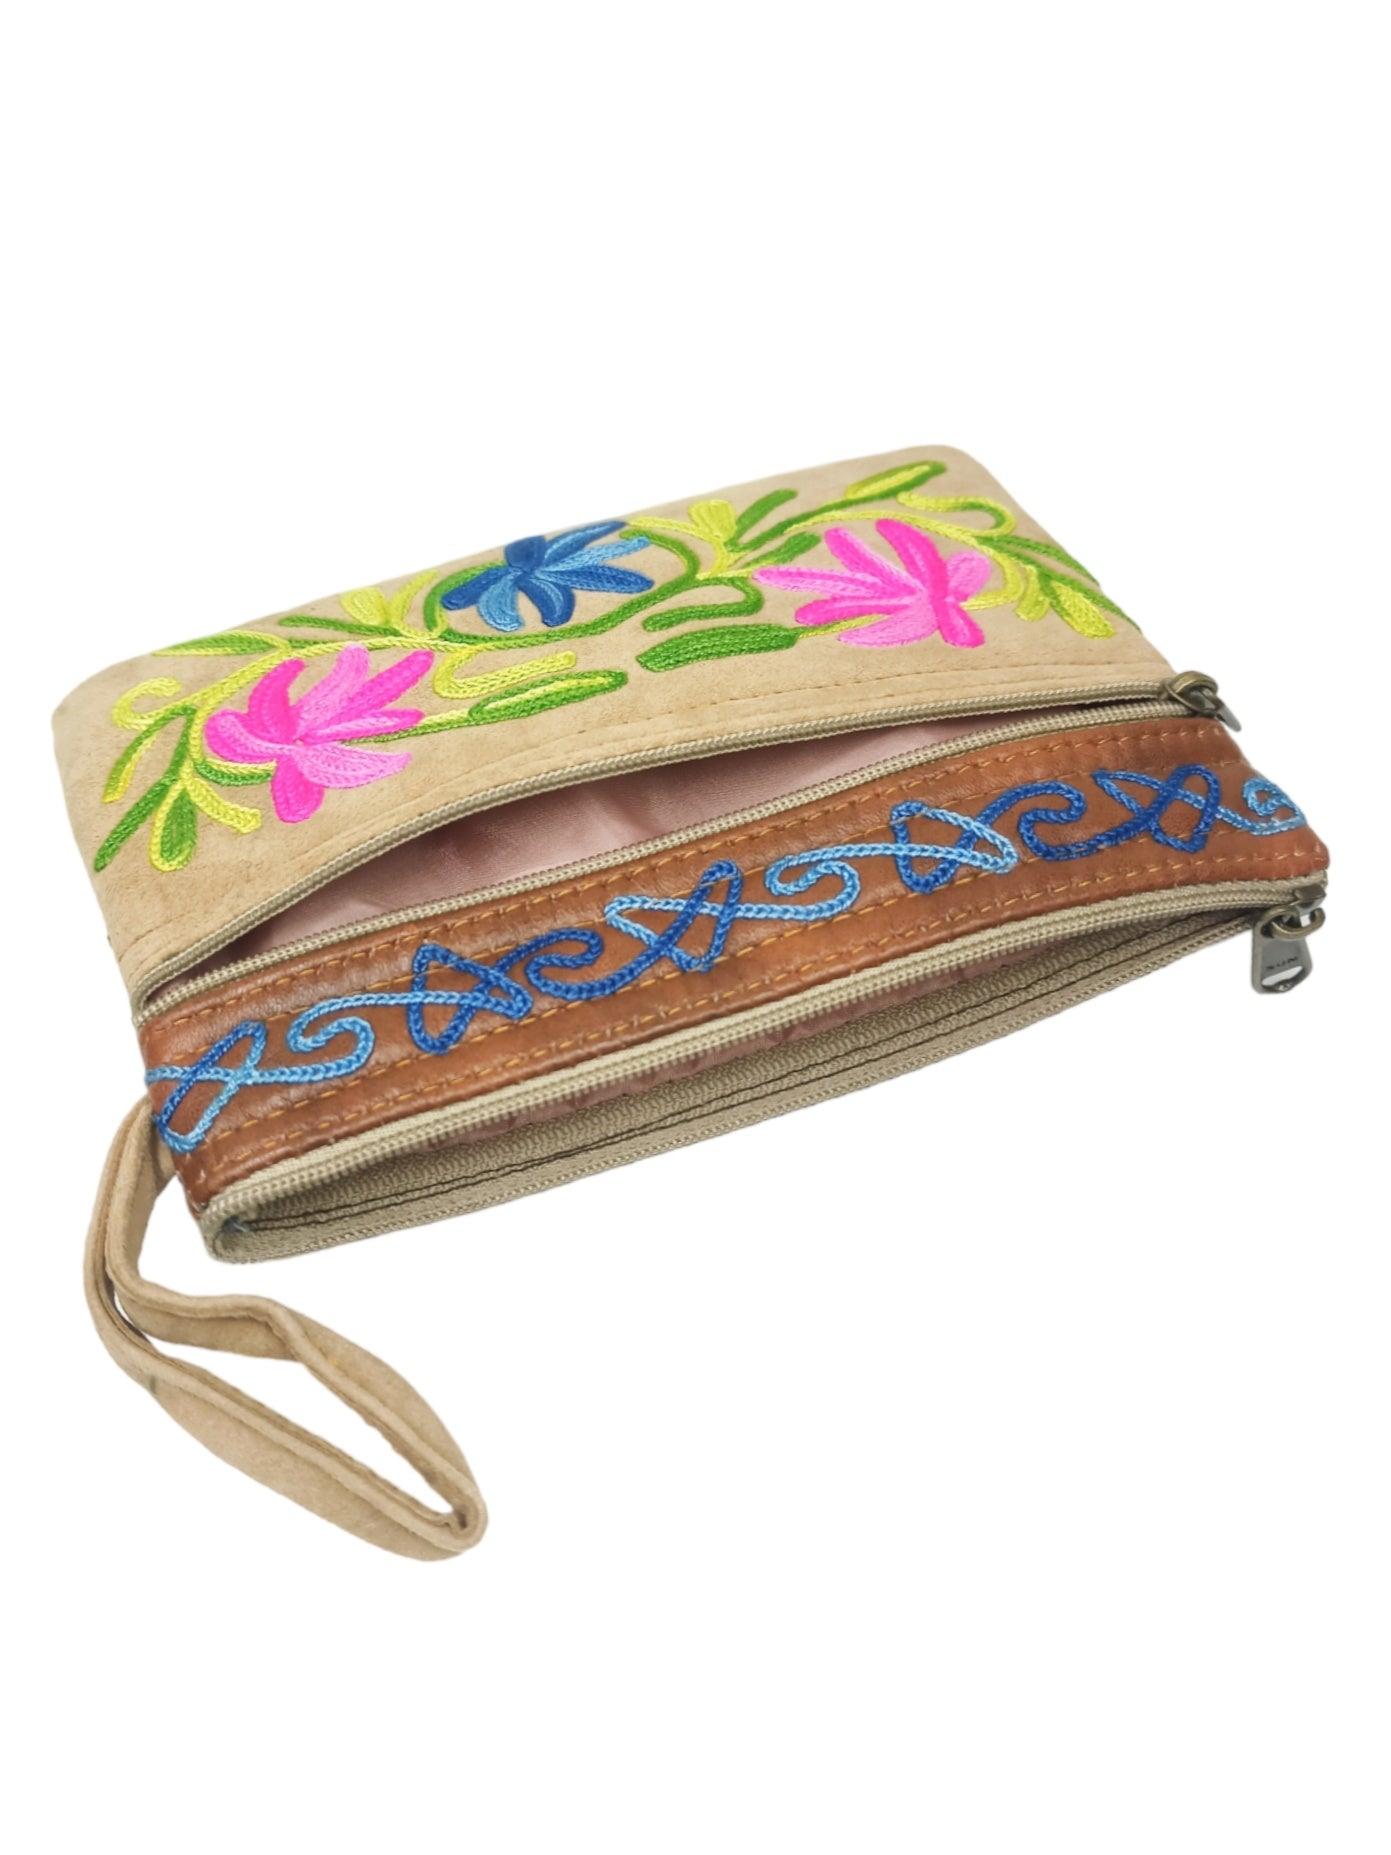 Suede Leather Purse | Aari Hand Purch | 6" 3 Zip Embroidered Purse